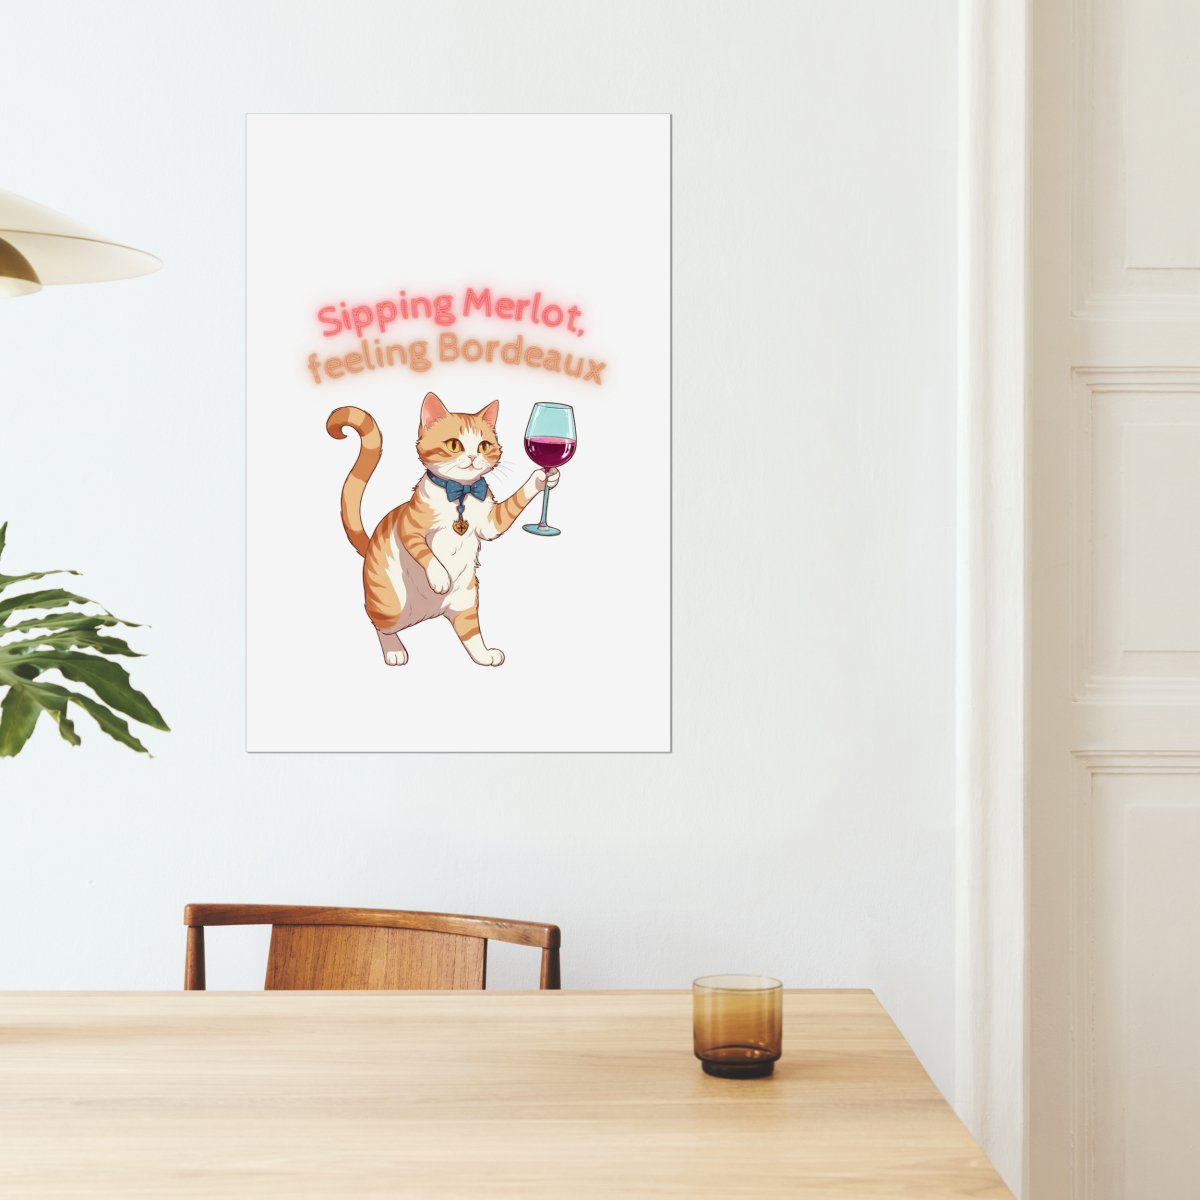 Sipping merlot - Art print - Poster - Ever colorful